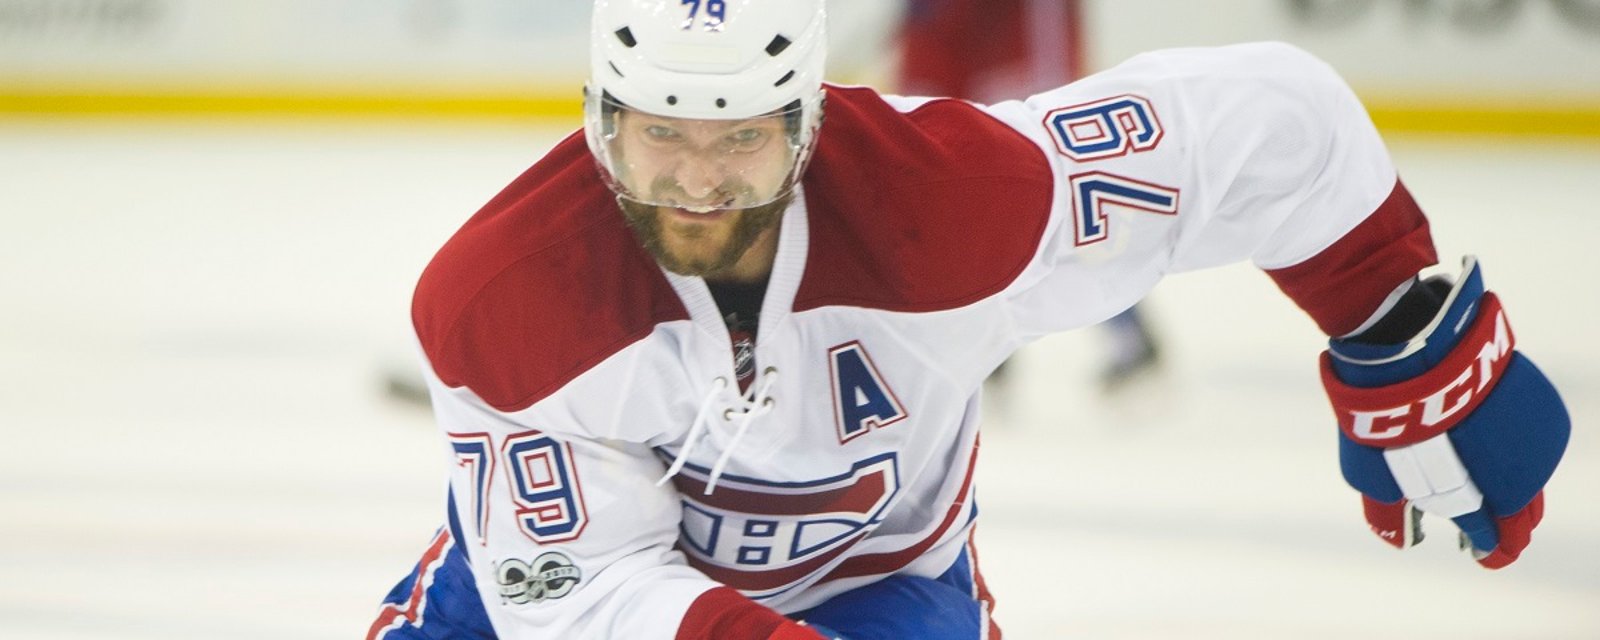 Conflicting reports of an NHL return for Andrei Markov.